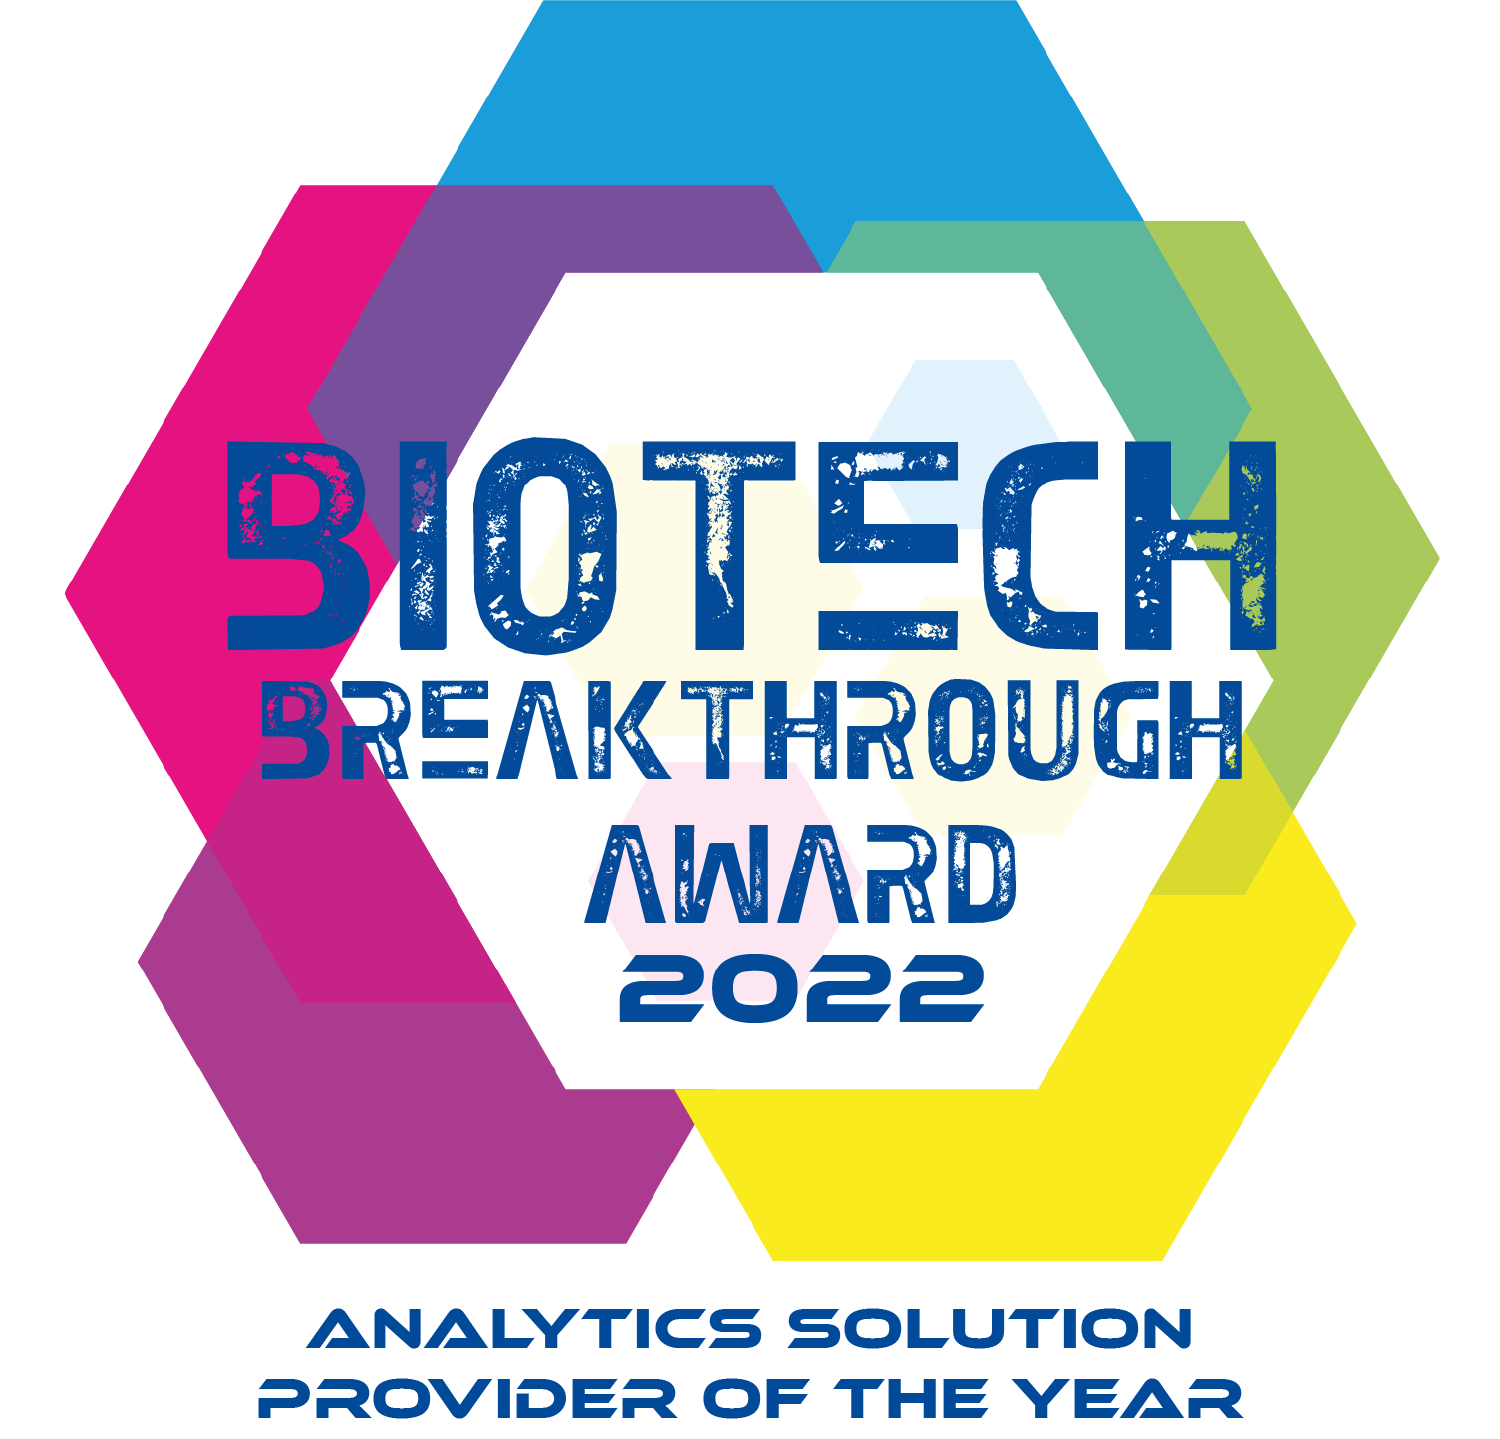 Saama Named Analytics Solution Provider of the Year by BioTech Breakthrough Awards